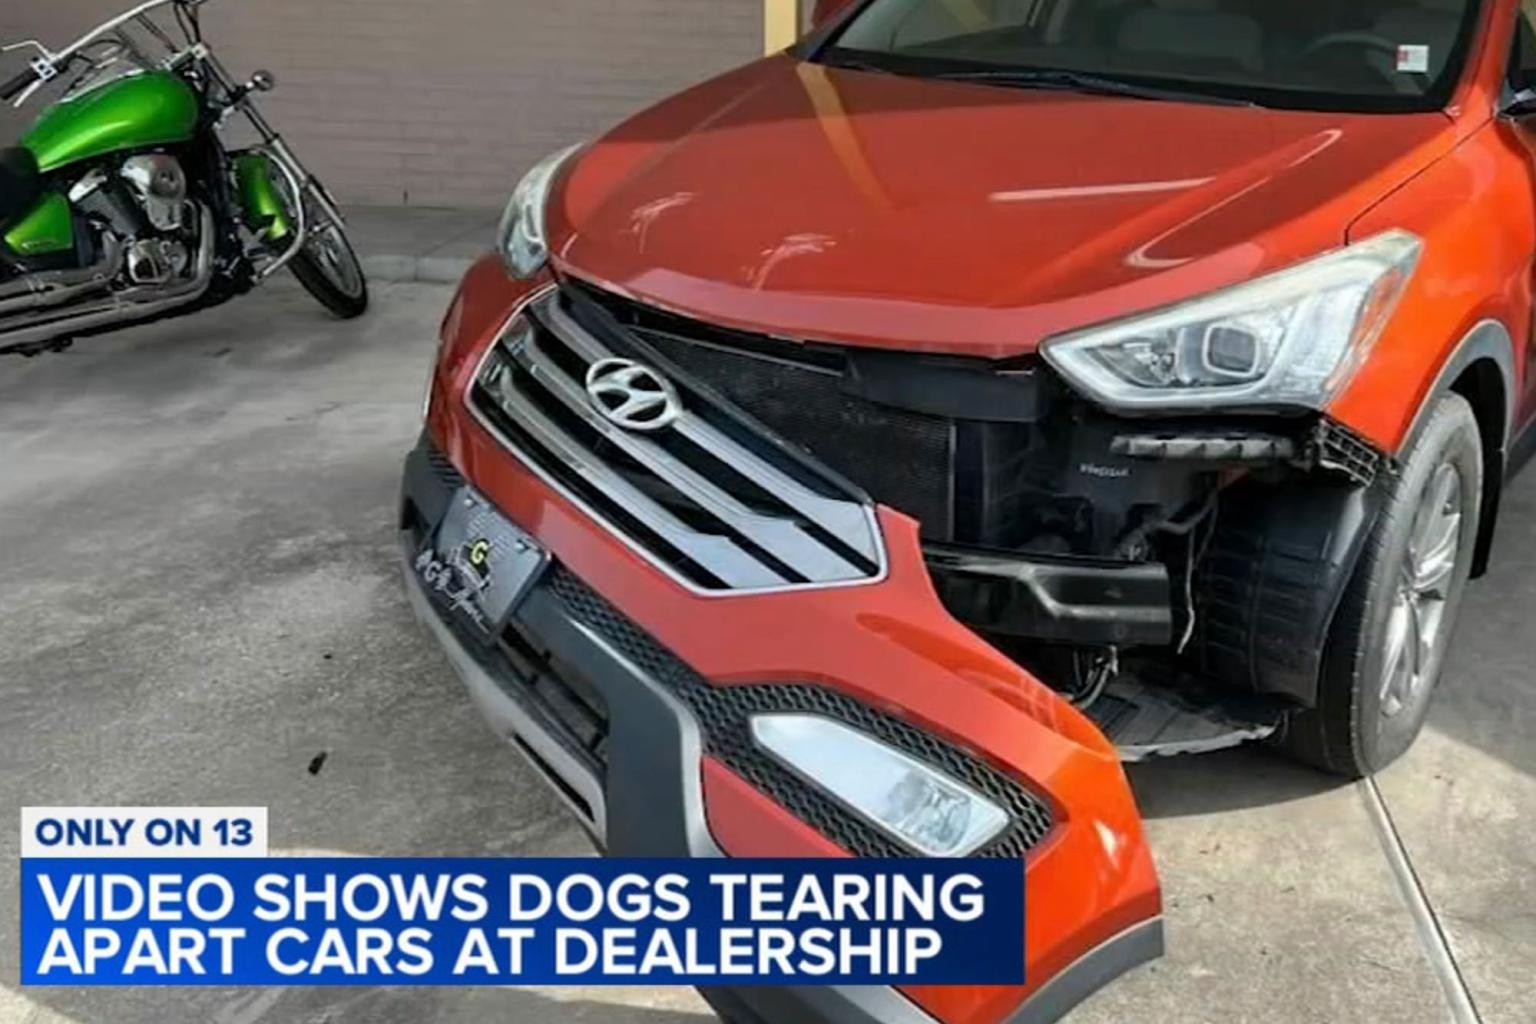 2 Stray Dogs Destroy Cars at Texas Dealership